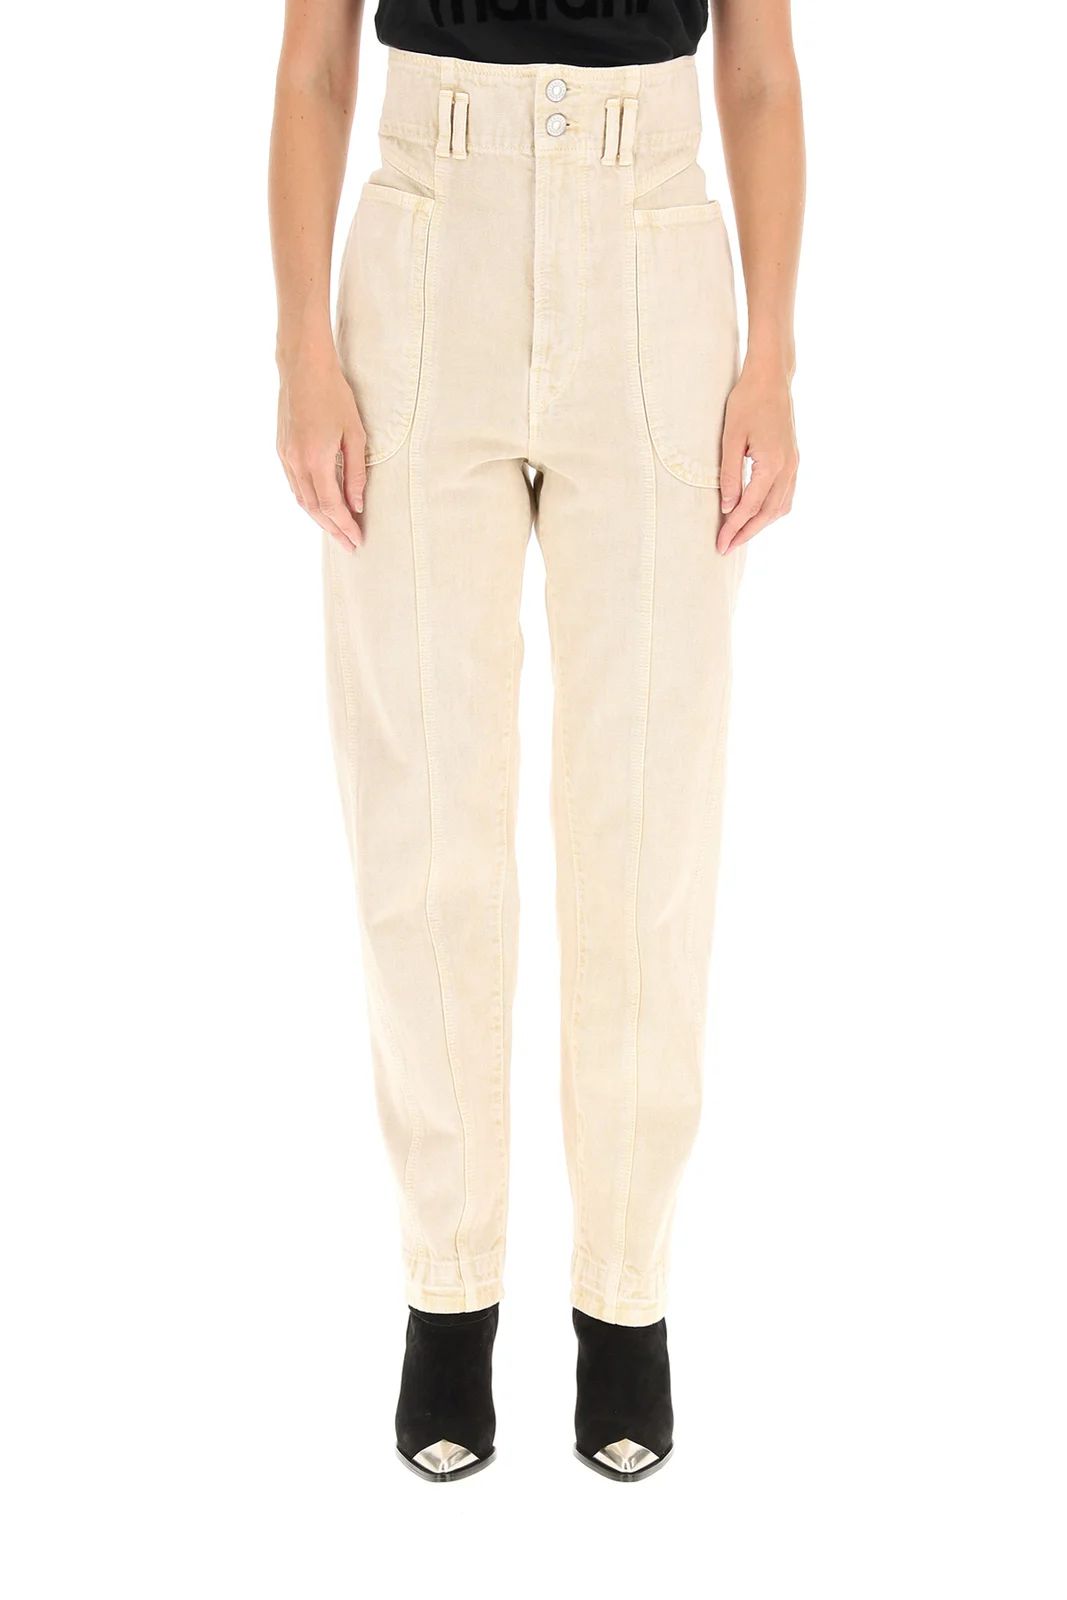 Isabel Marant Étoile Tess High-Waisted Trousers | Cettire Global